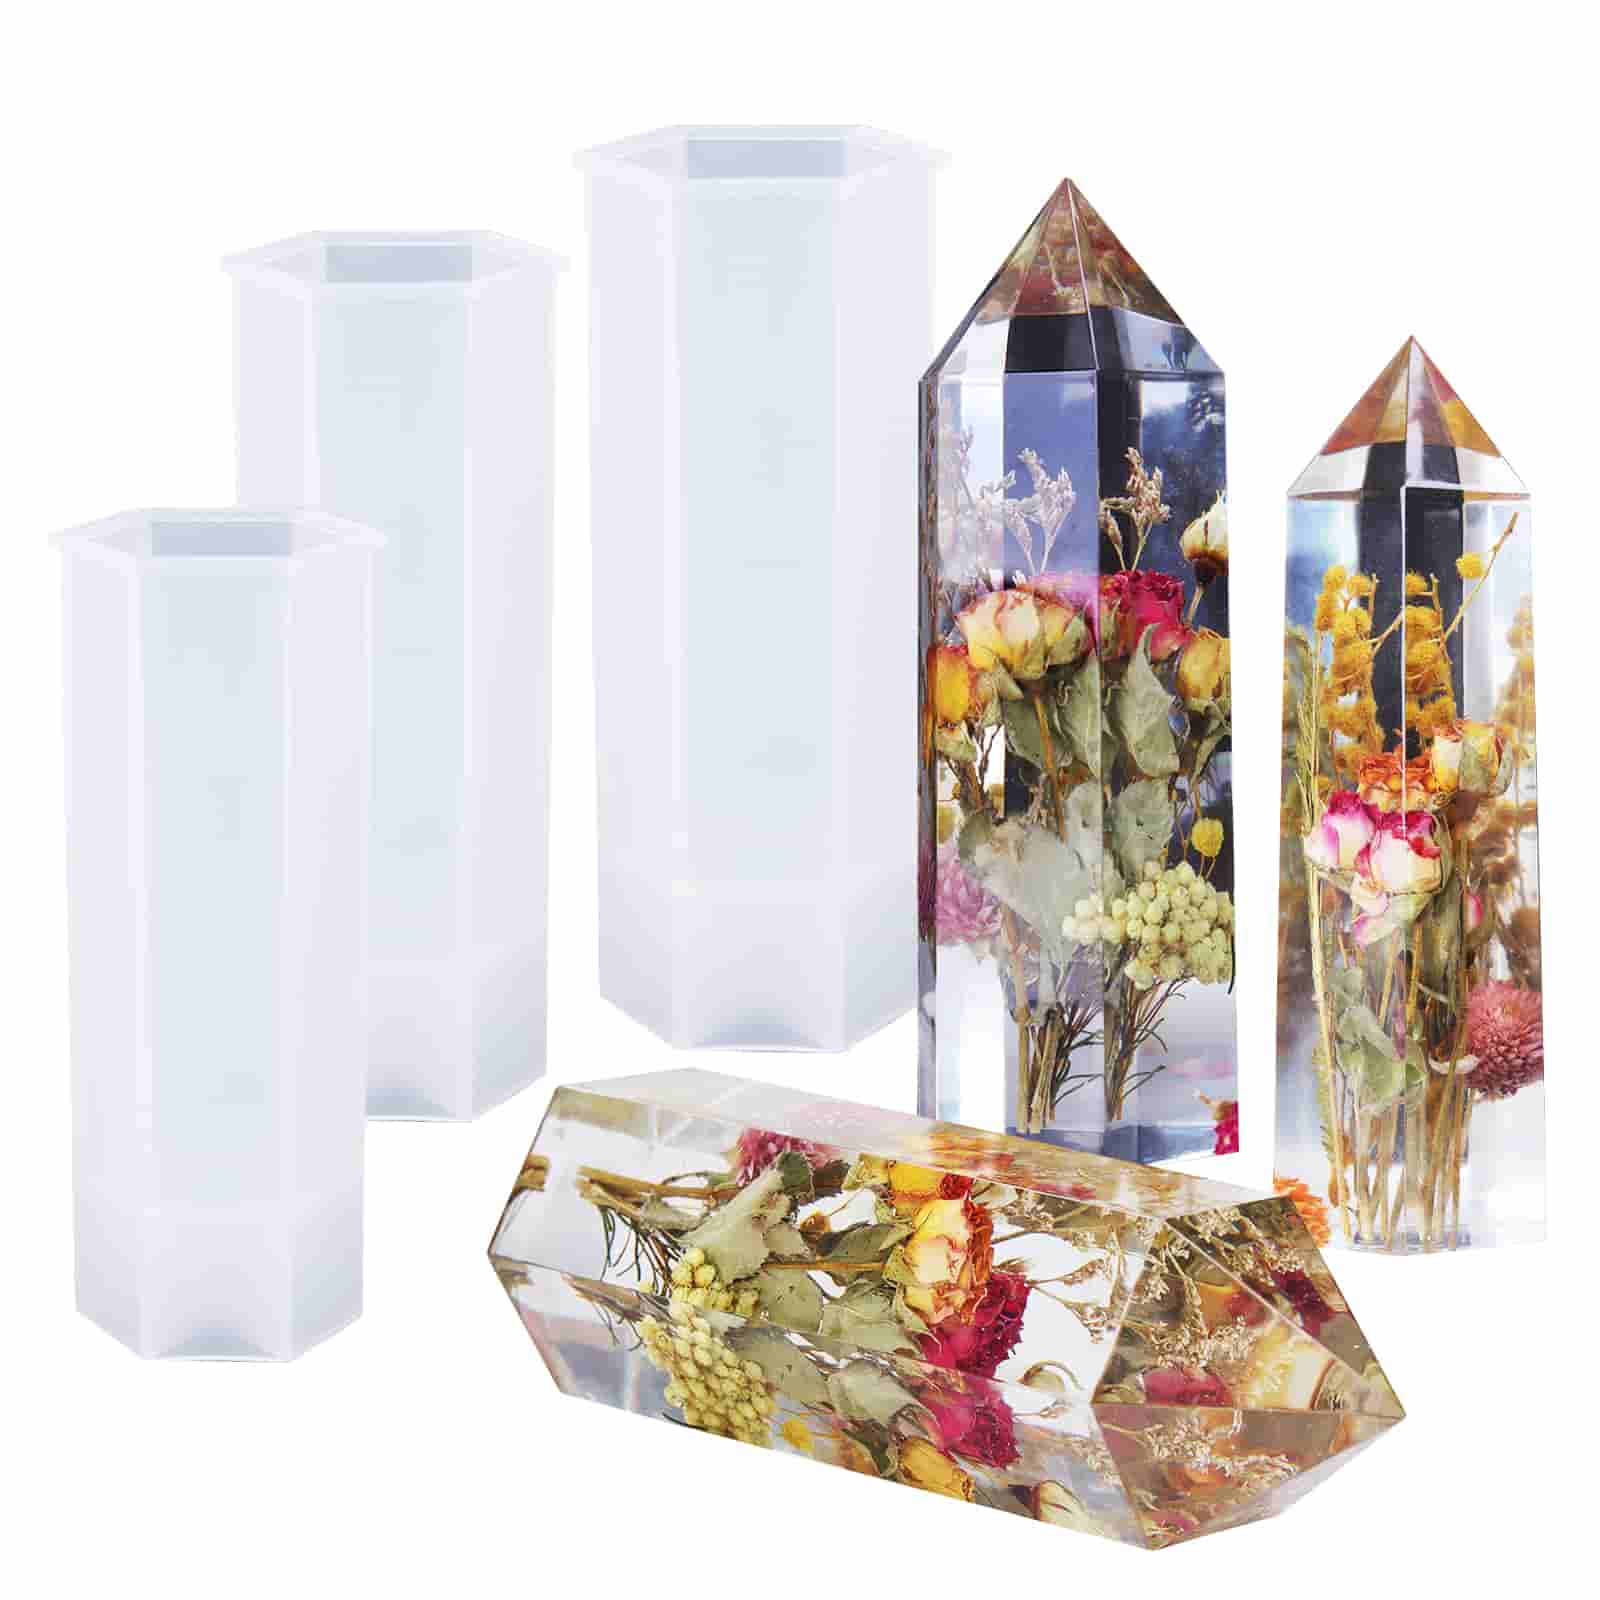 Large Crystal Tower Resin Molds - 3 Pcs - Epoxy Resin Molds,DIY Resin  Flowers Crystals,Faux Quartz Healing Crystal,Home Decors – Let's Resin